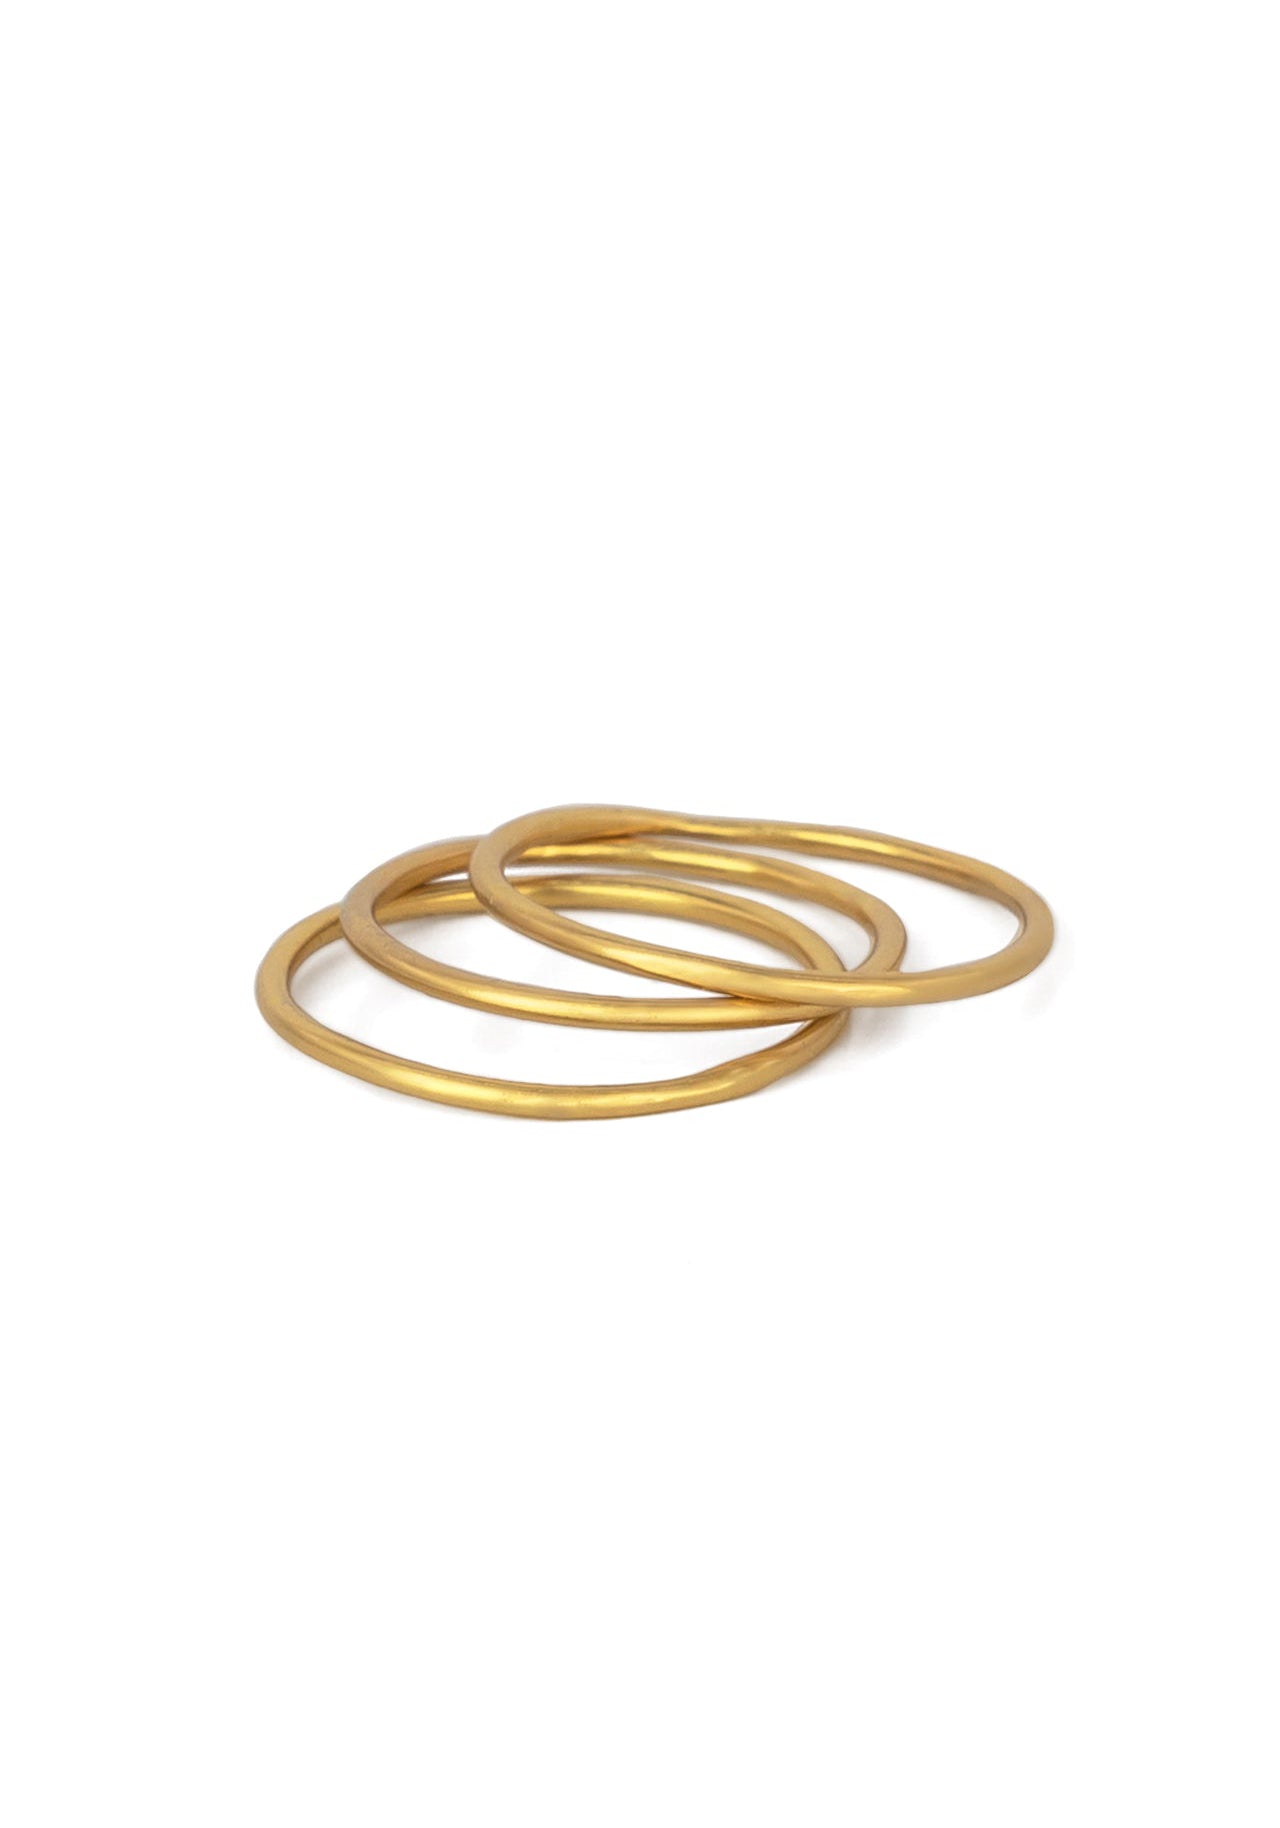 Itty Bitty Midi Ring - Gold Plated